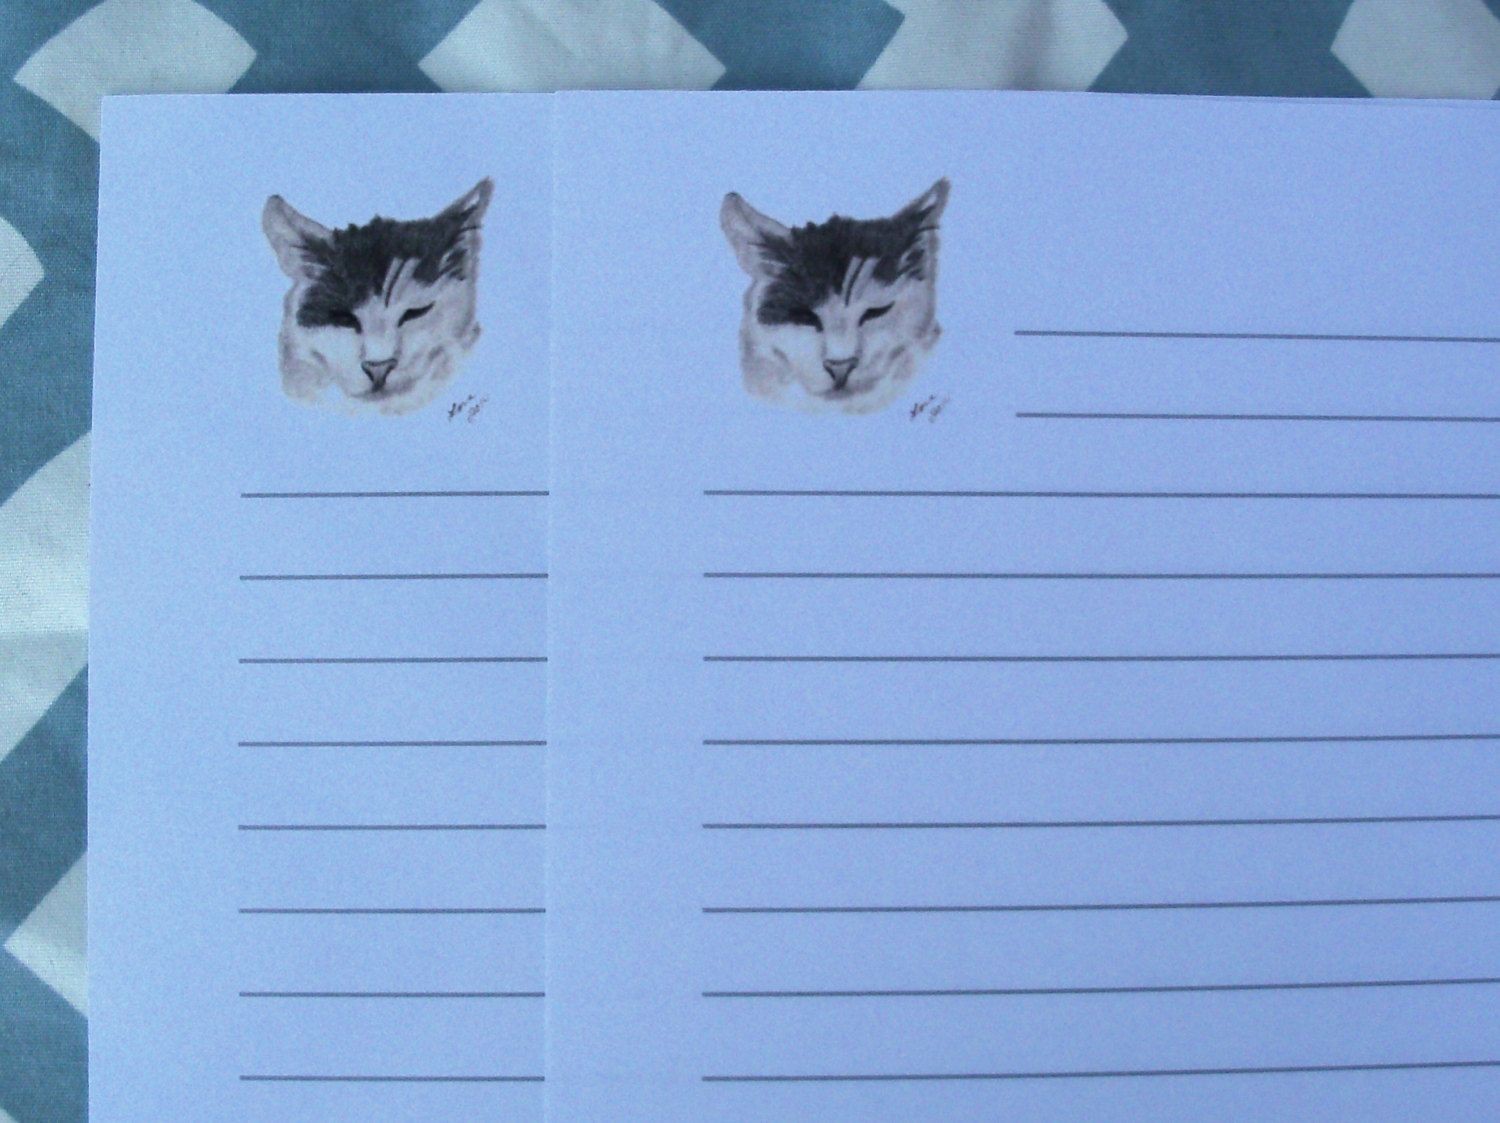 Papercraft Cats Stationery Letter Sheets Lined Stationery Sheets Kitten